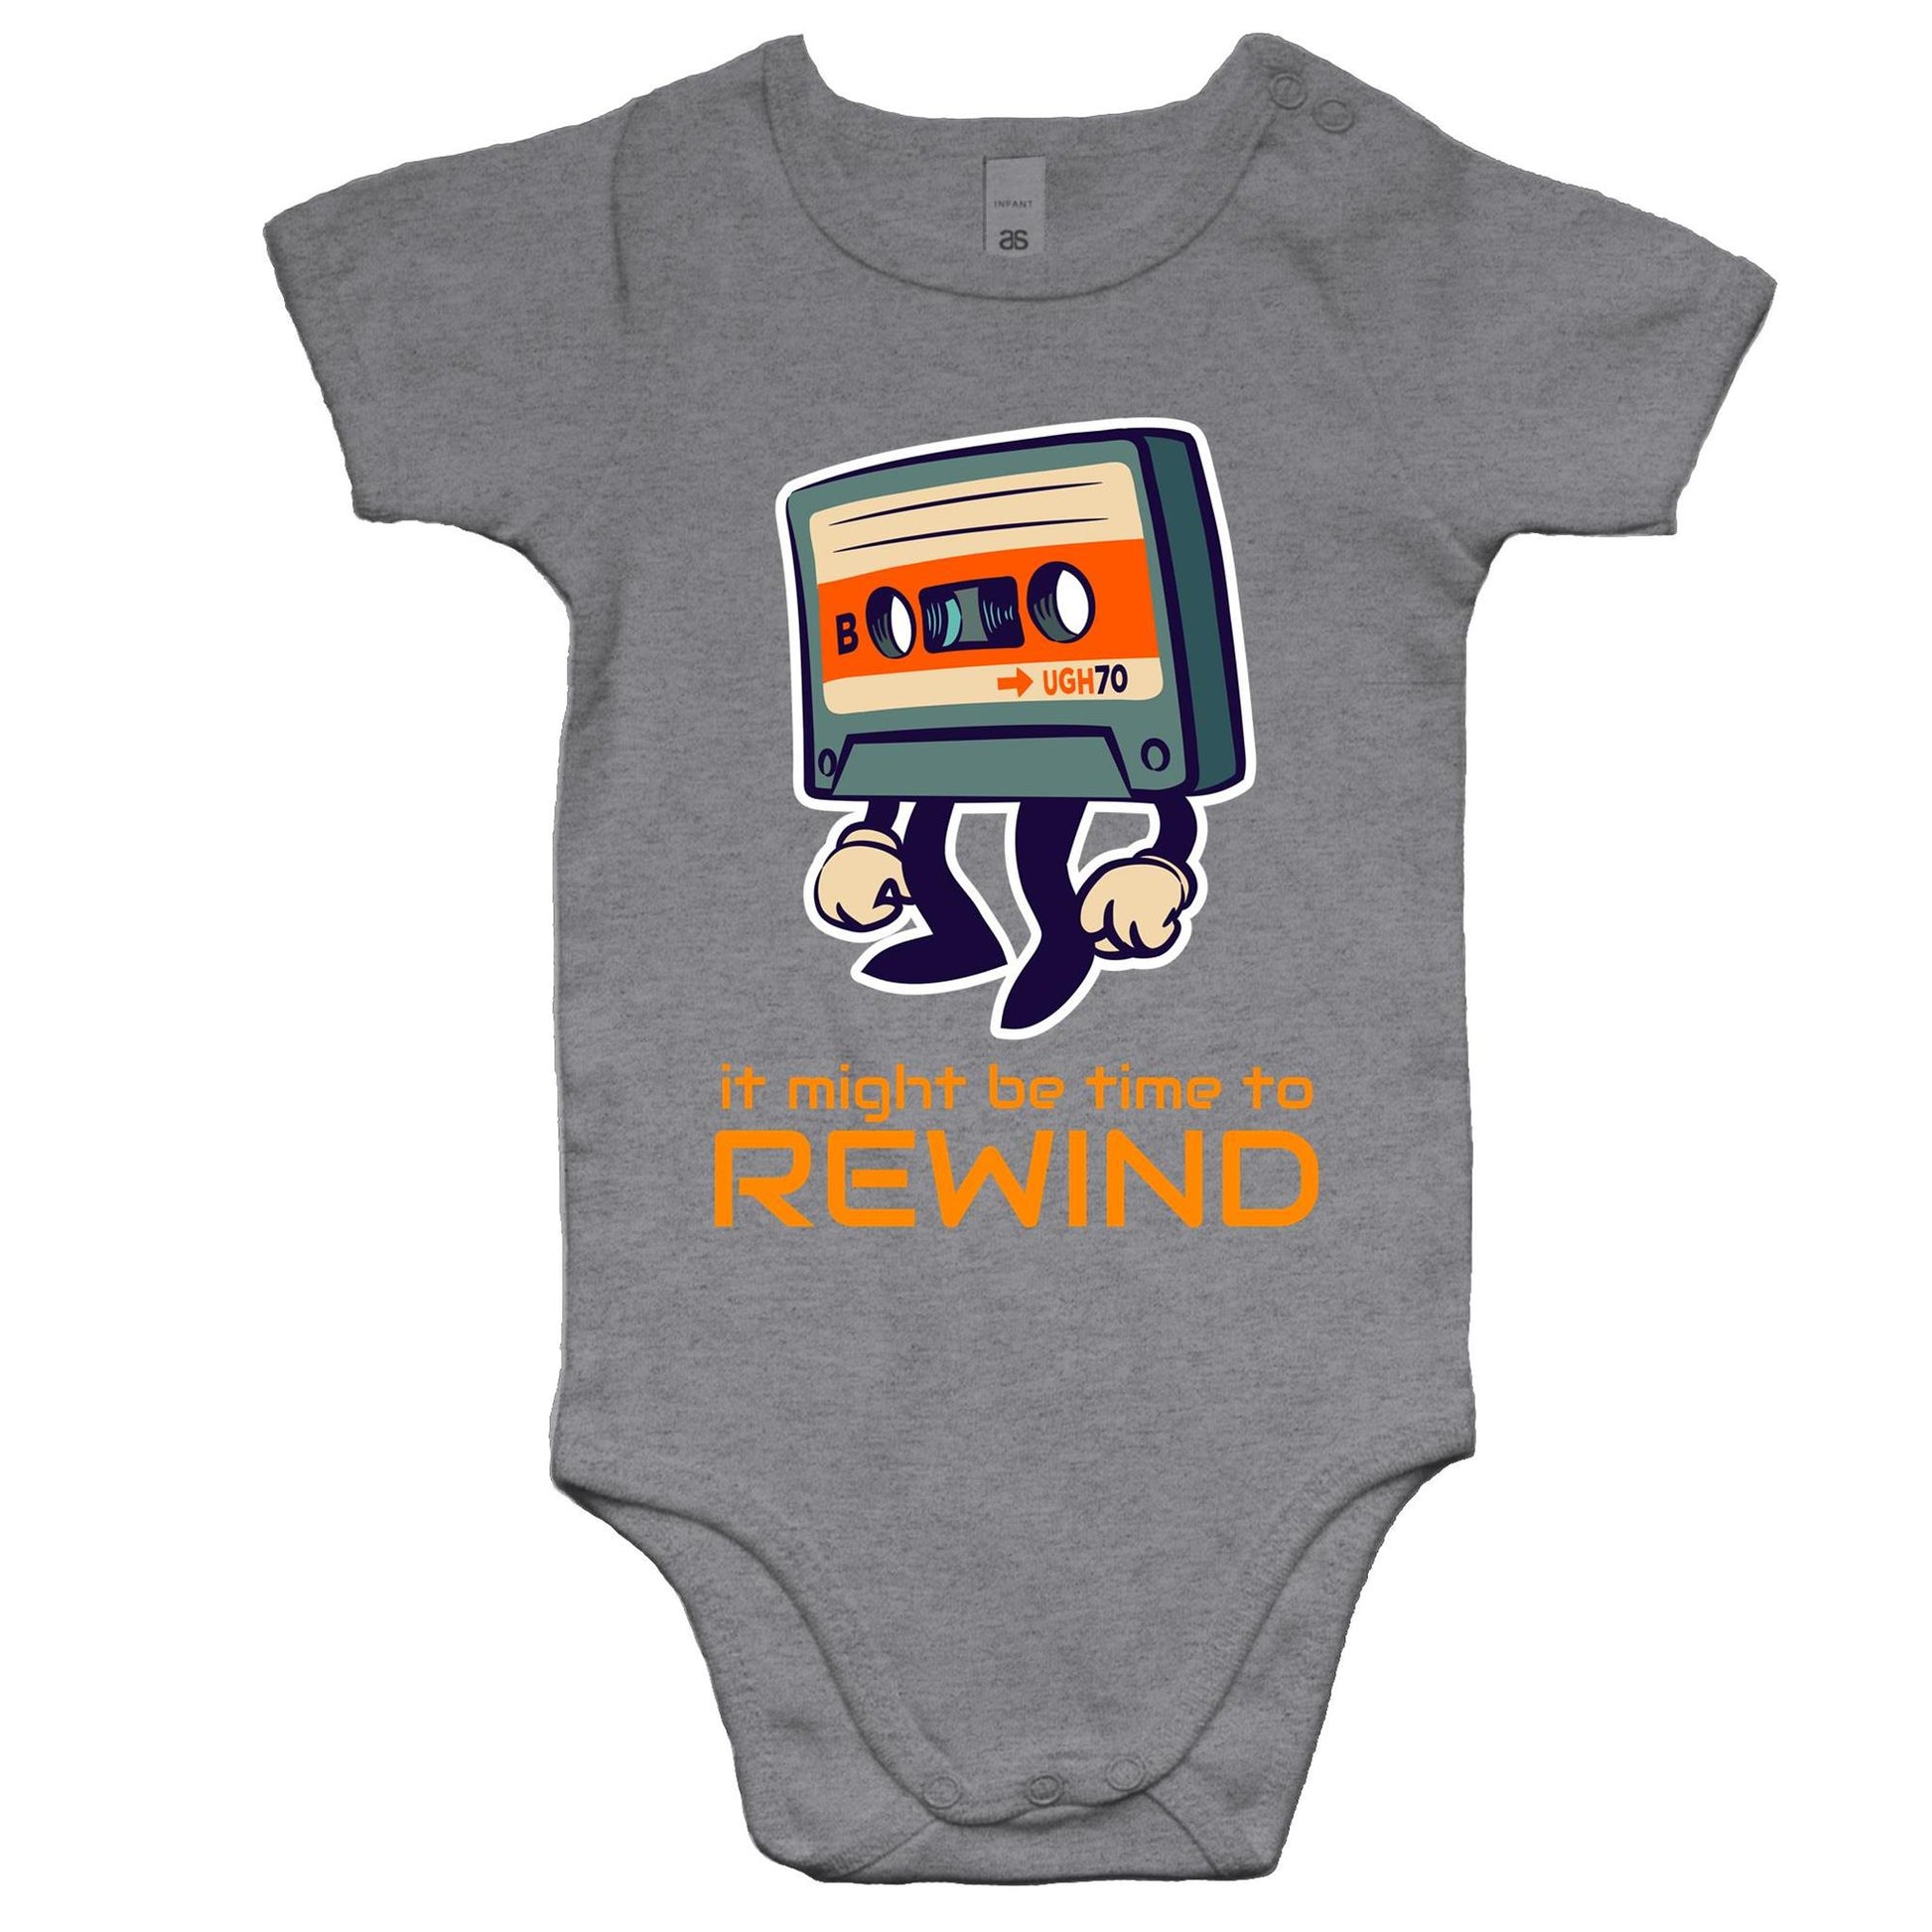 It Might Be Time To Rewind - Baby Bodysuit Grey Marle Baby Bodysuit Music Retro